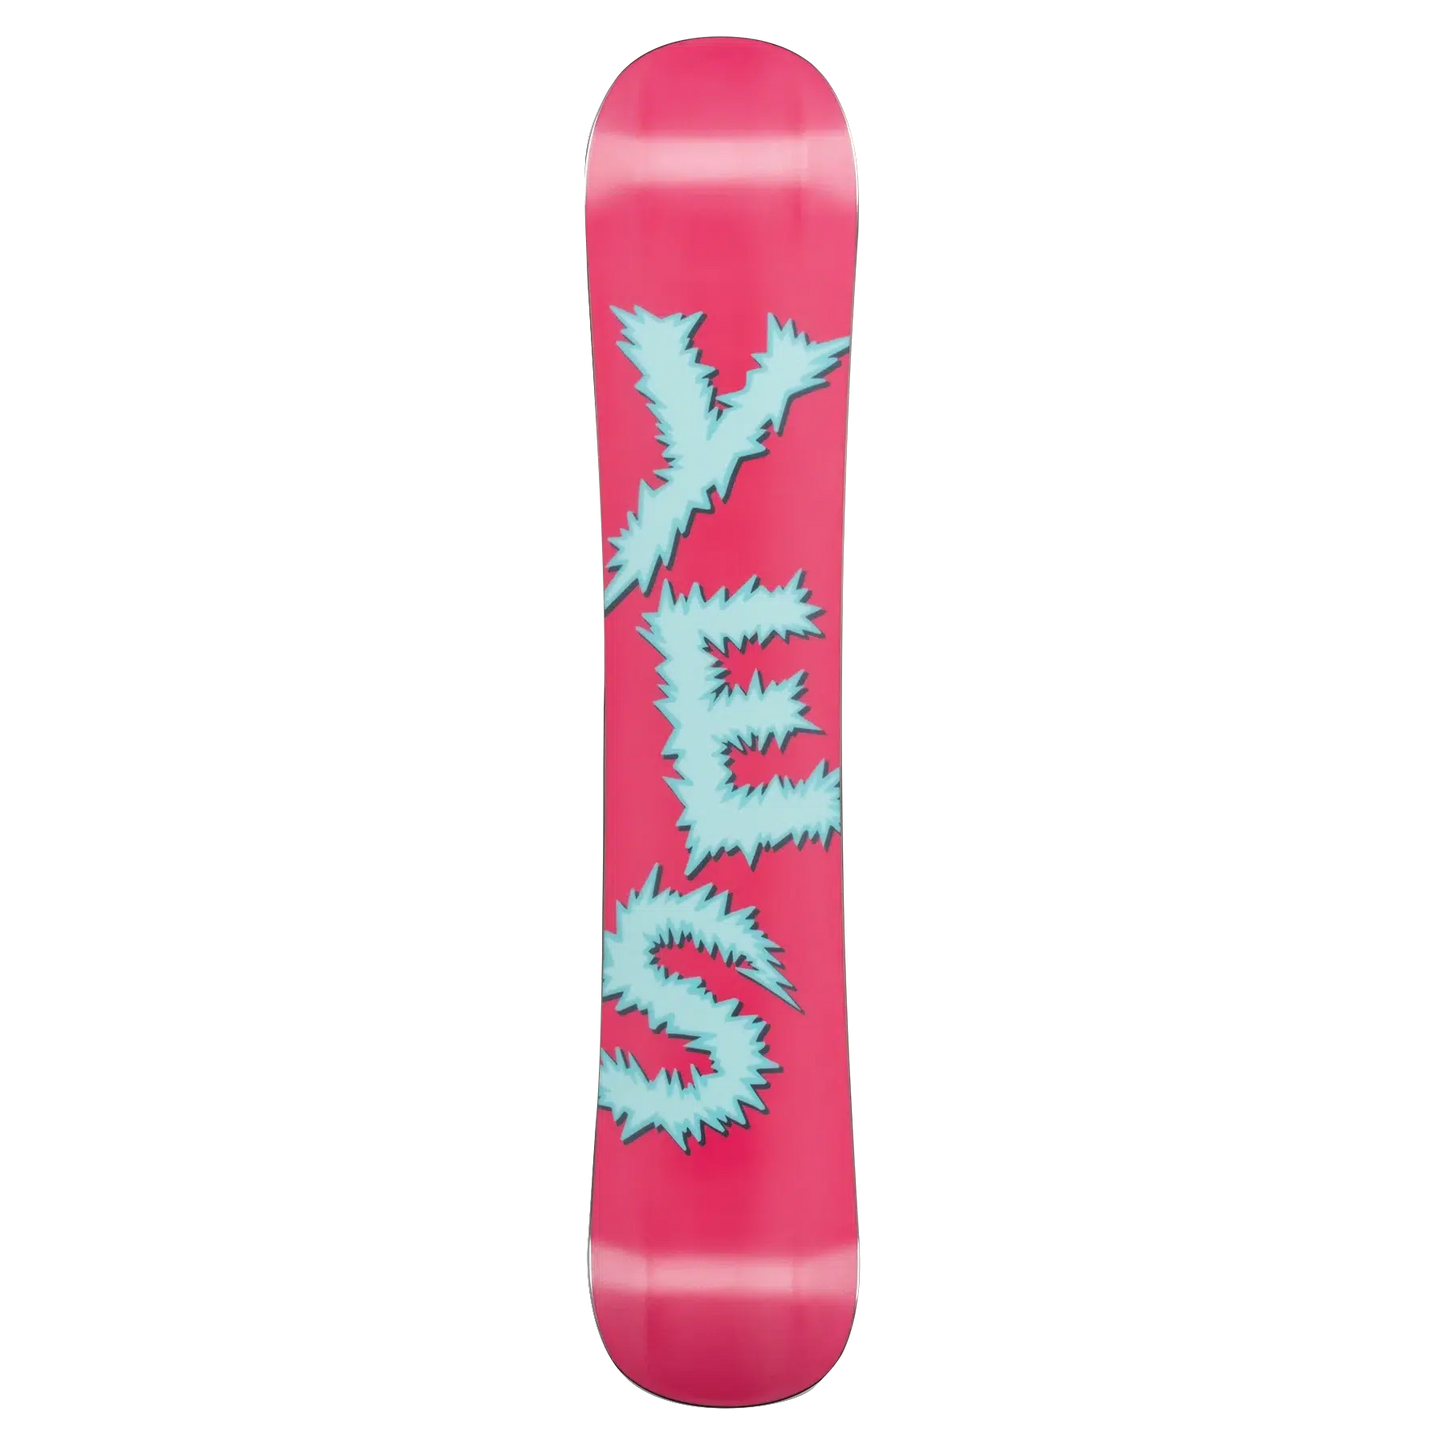 2025 Yes AirMaster Snowboard